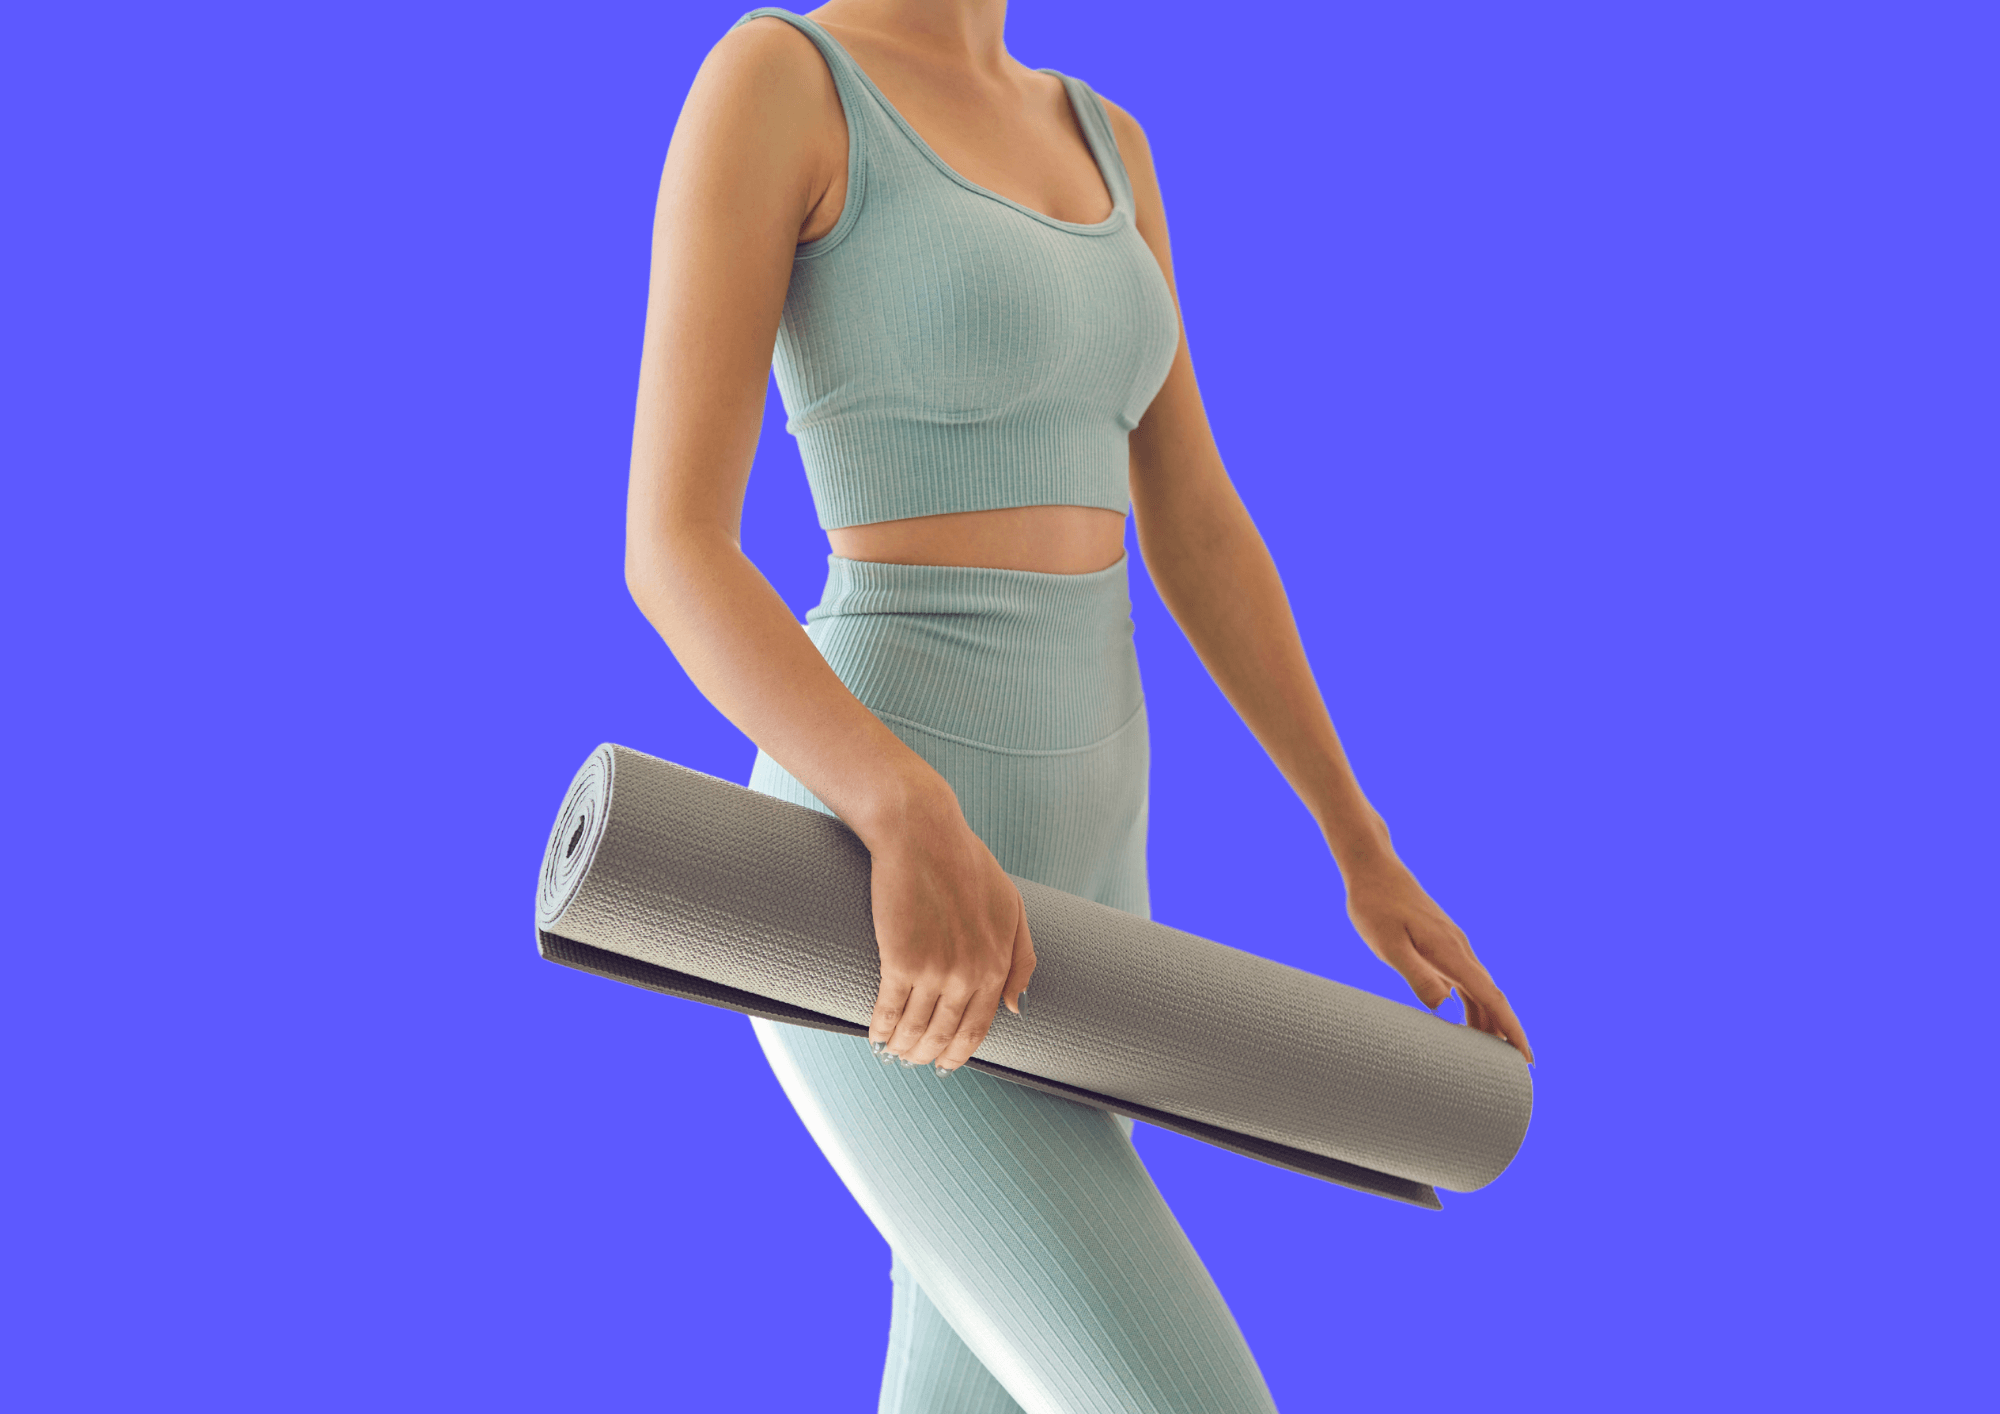 Woman is carrying yoga mat for Akina home workout.